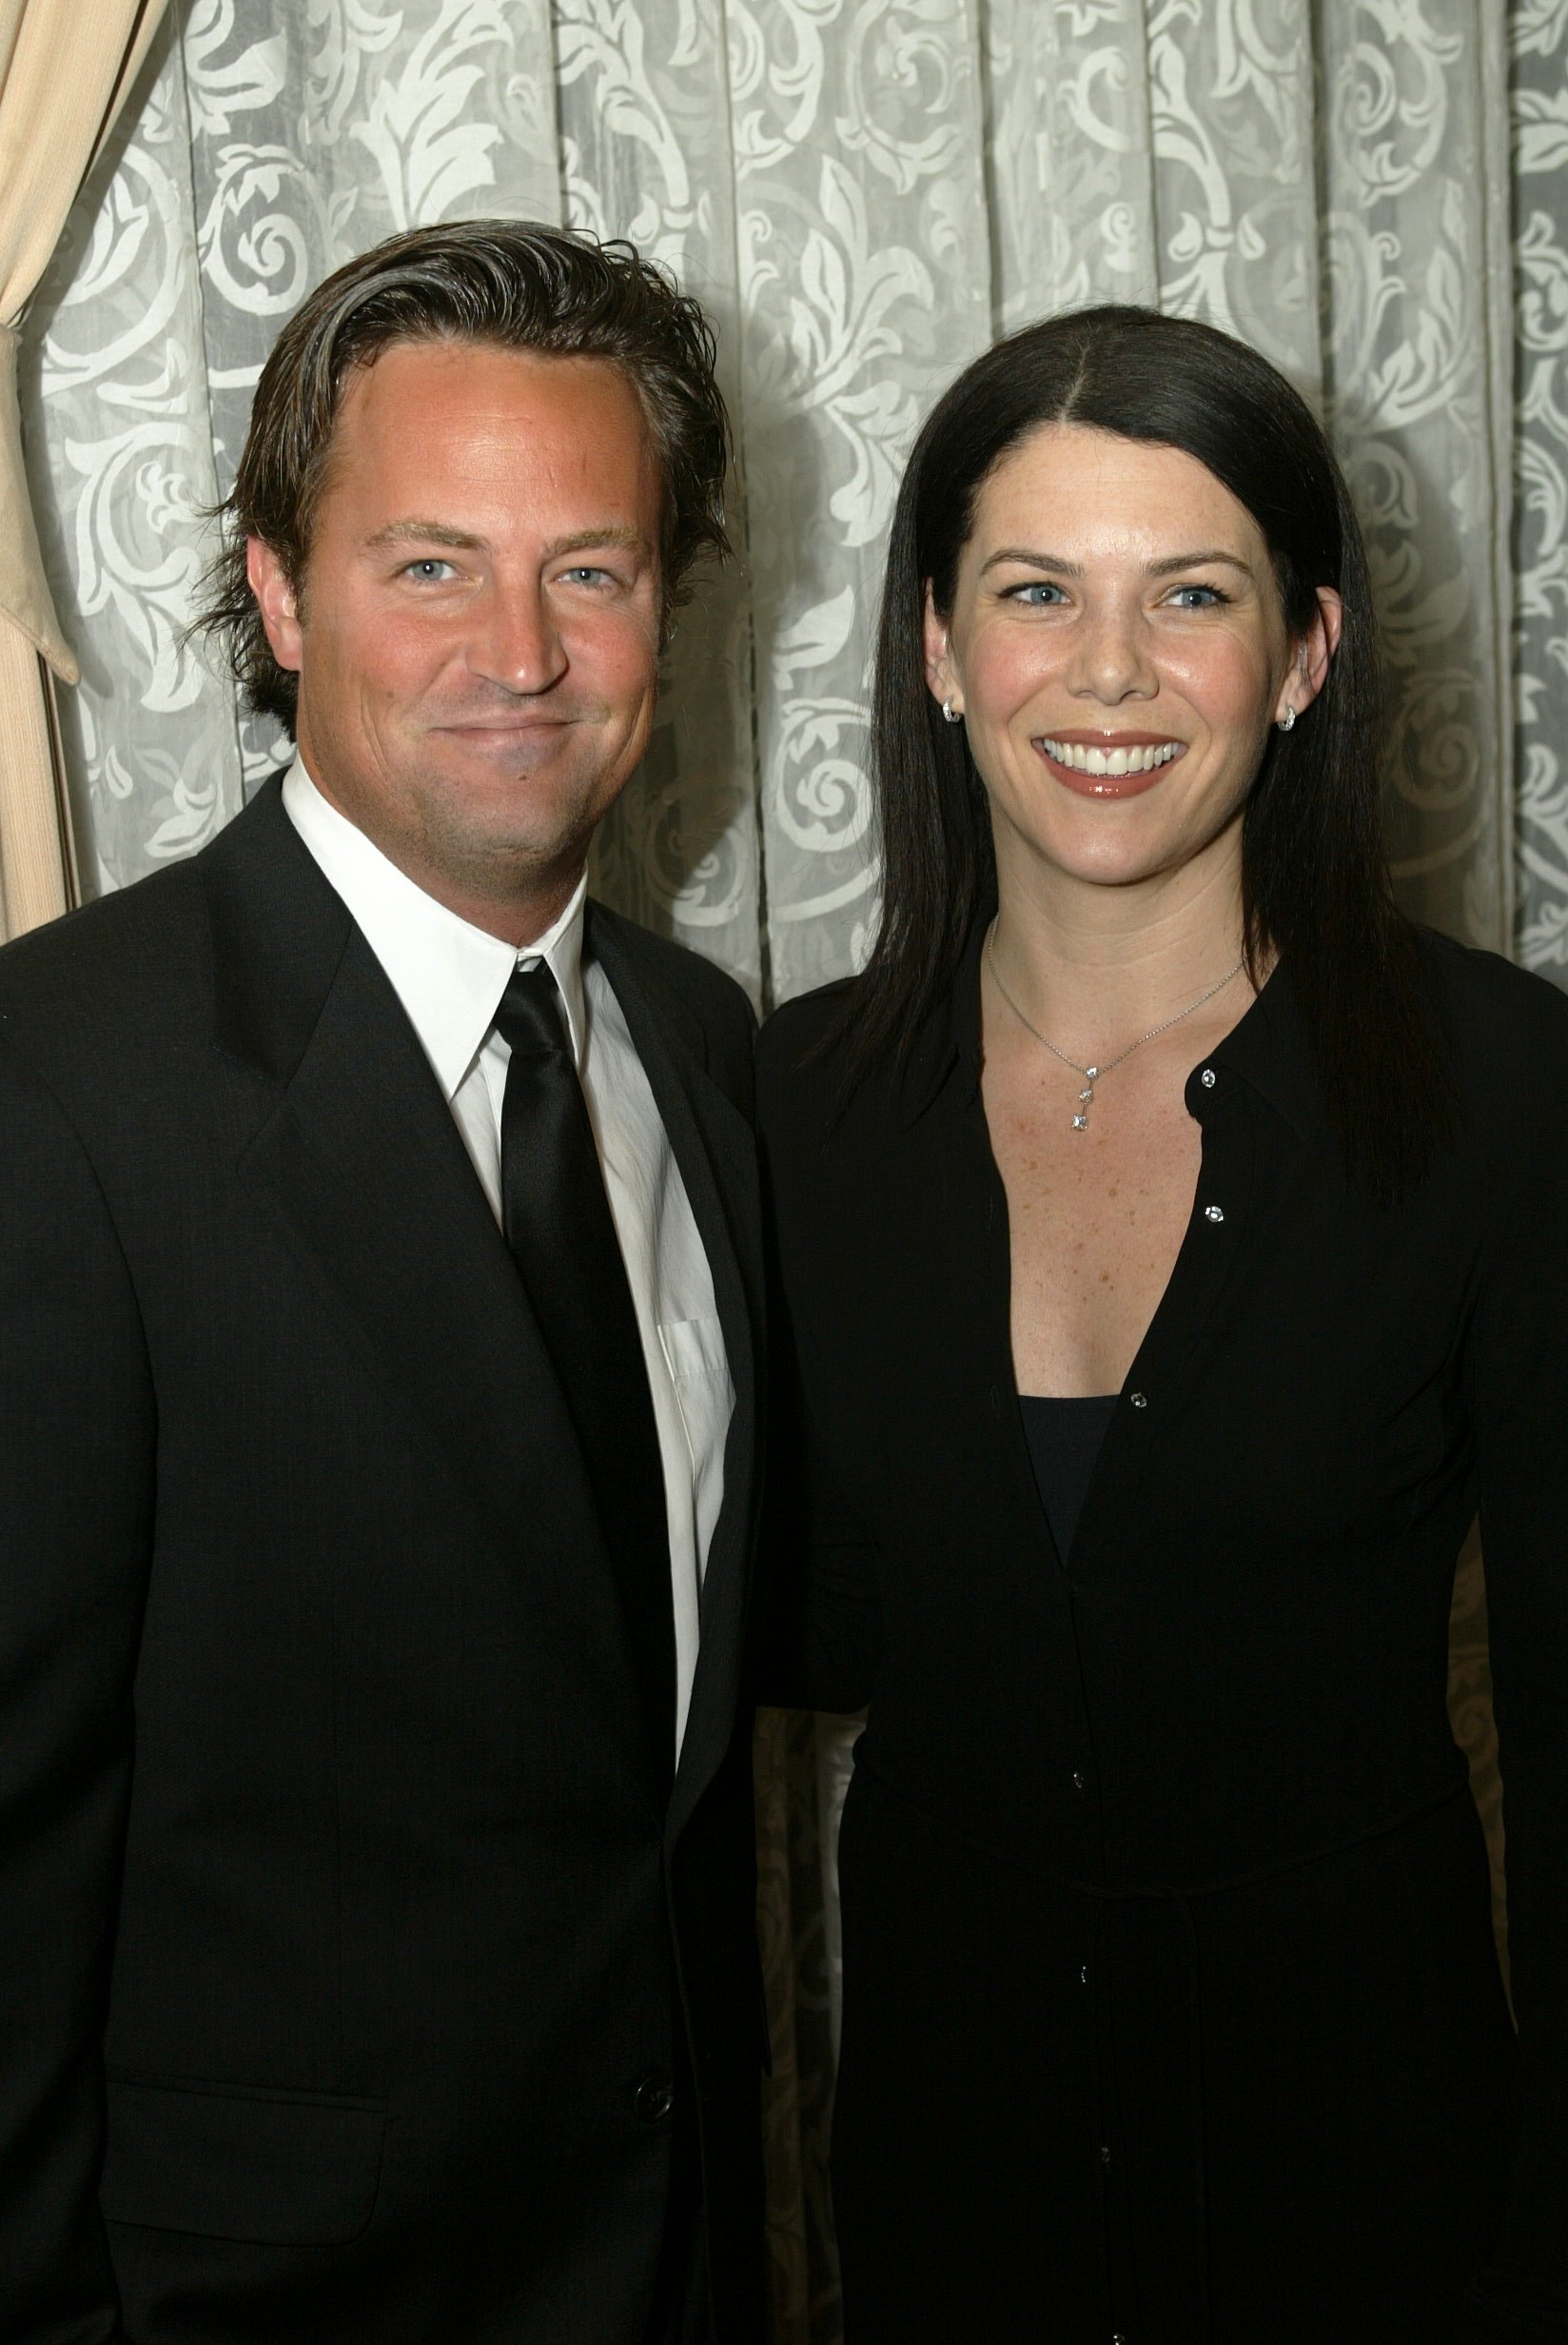 Matthew Perry's Dating History See Past Relationships and Girlfriends